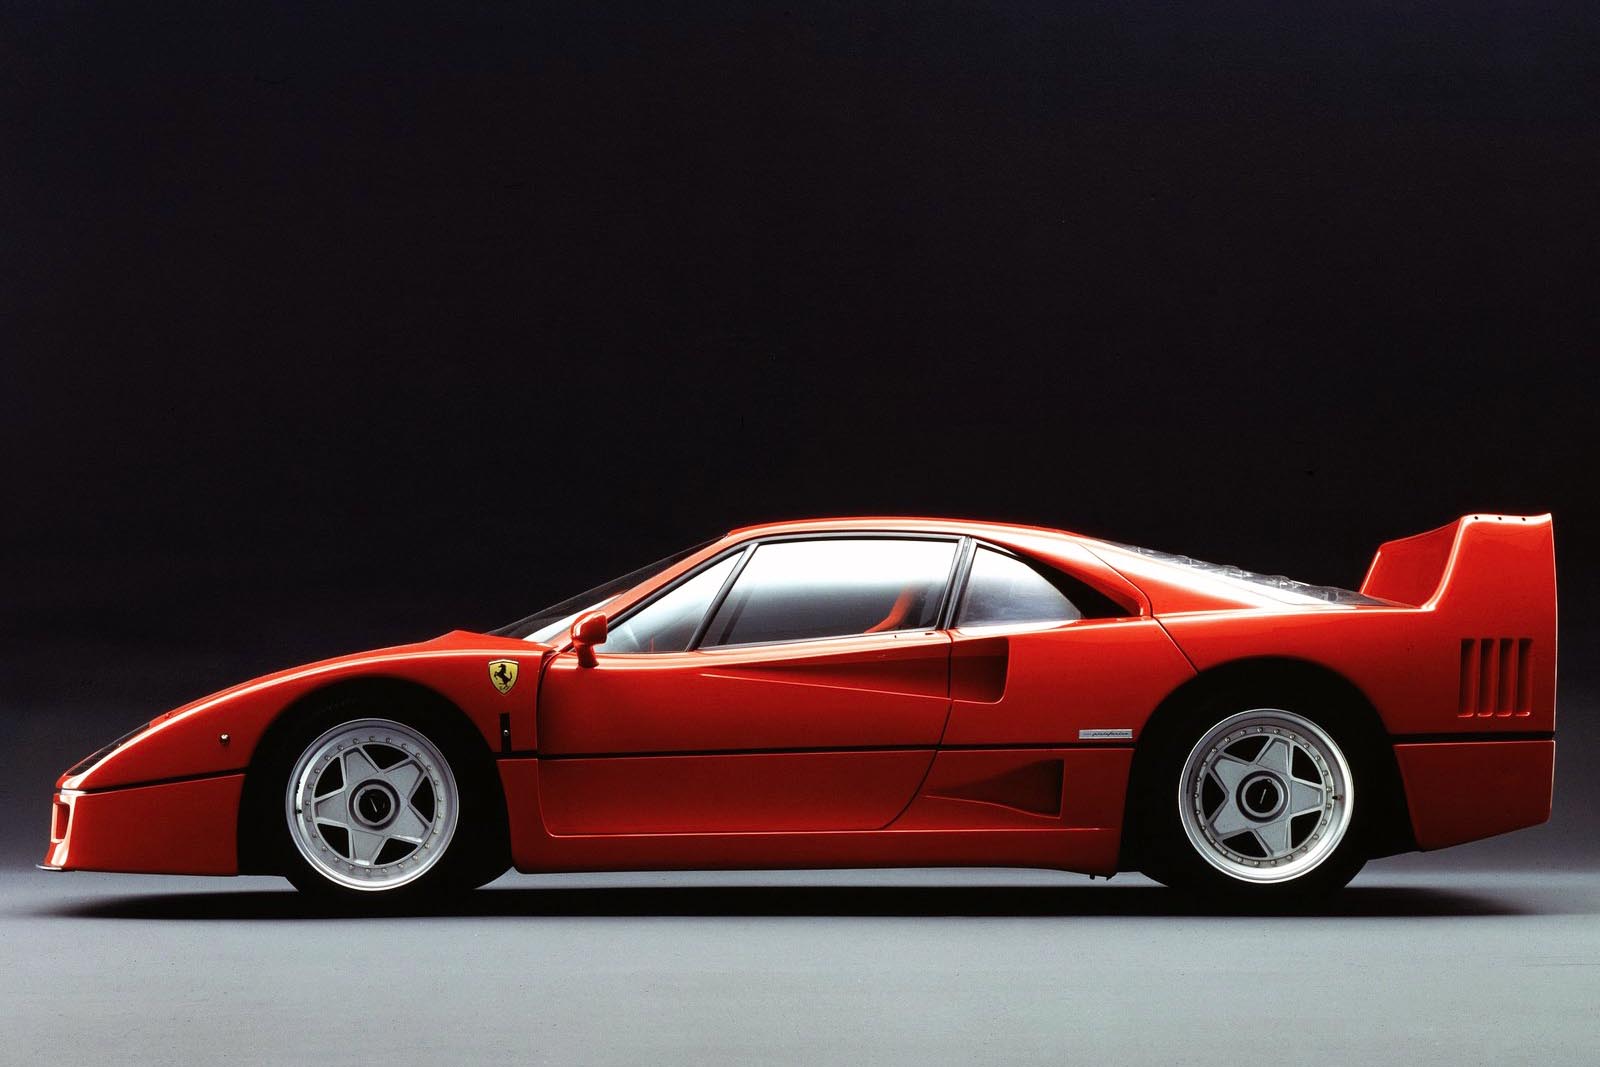 Dear Ferrari: thanks for being Italian, being pretty sweet, and making cars we listen to on YouTube when the boss is distracted by the Keurig for a latte refill. Thanks, also, for the F40. We love its little boosted V8, how the exhaust sounds like a Velociraptor’s mating call, and the mental image of ripping through its gears like Christmas-morning wrapping paper. Still said to be the world’s best supercar, we’re glad this machine helped set the stage for the great supercars that we lust after today.